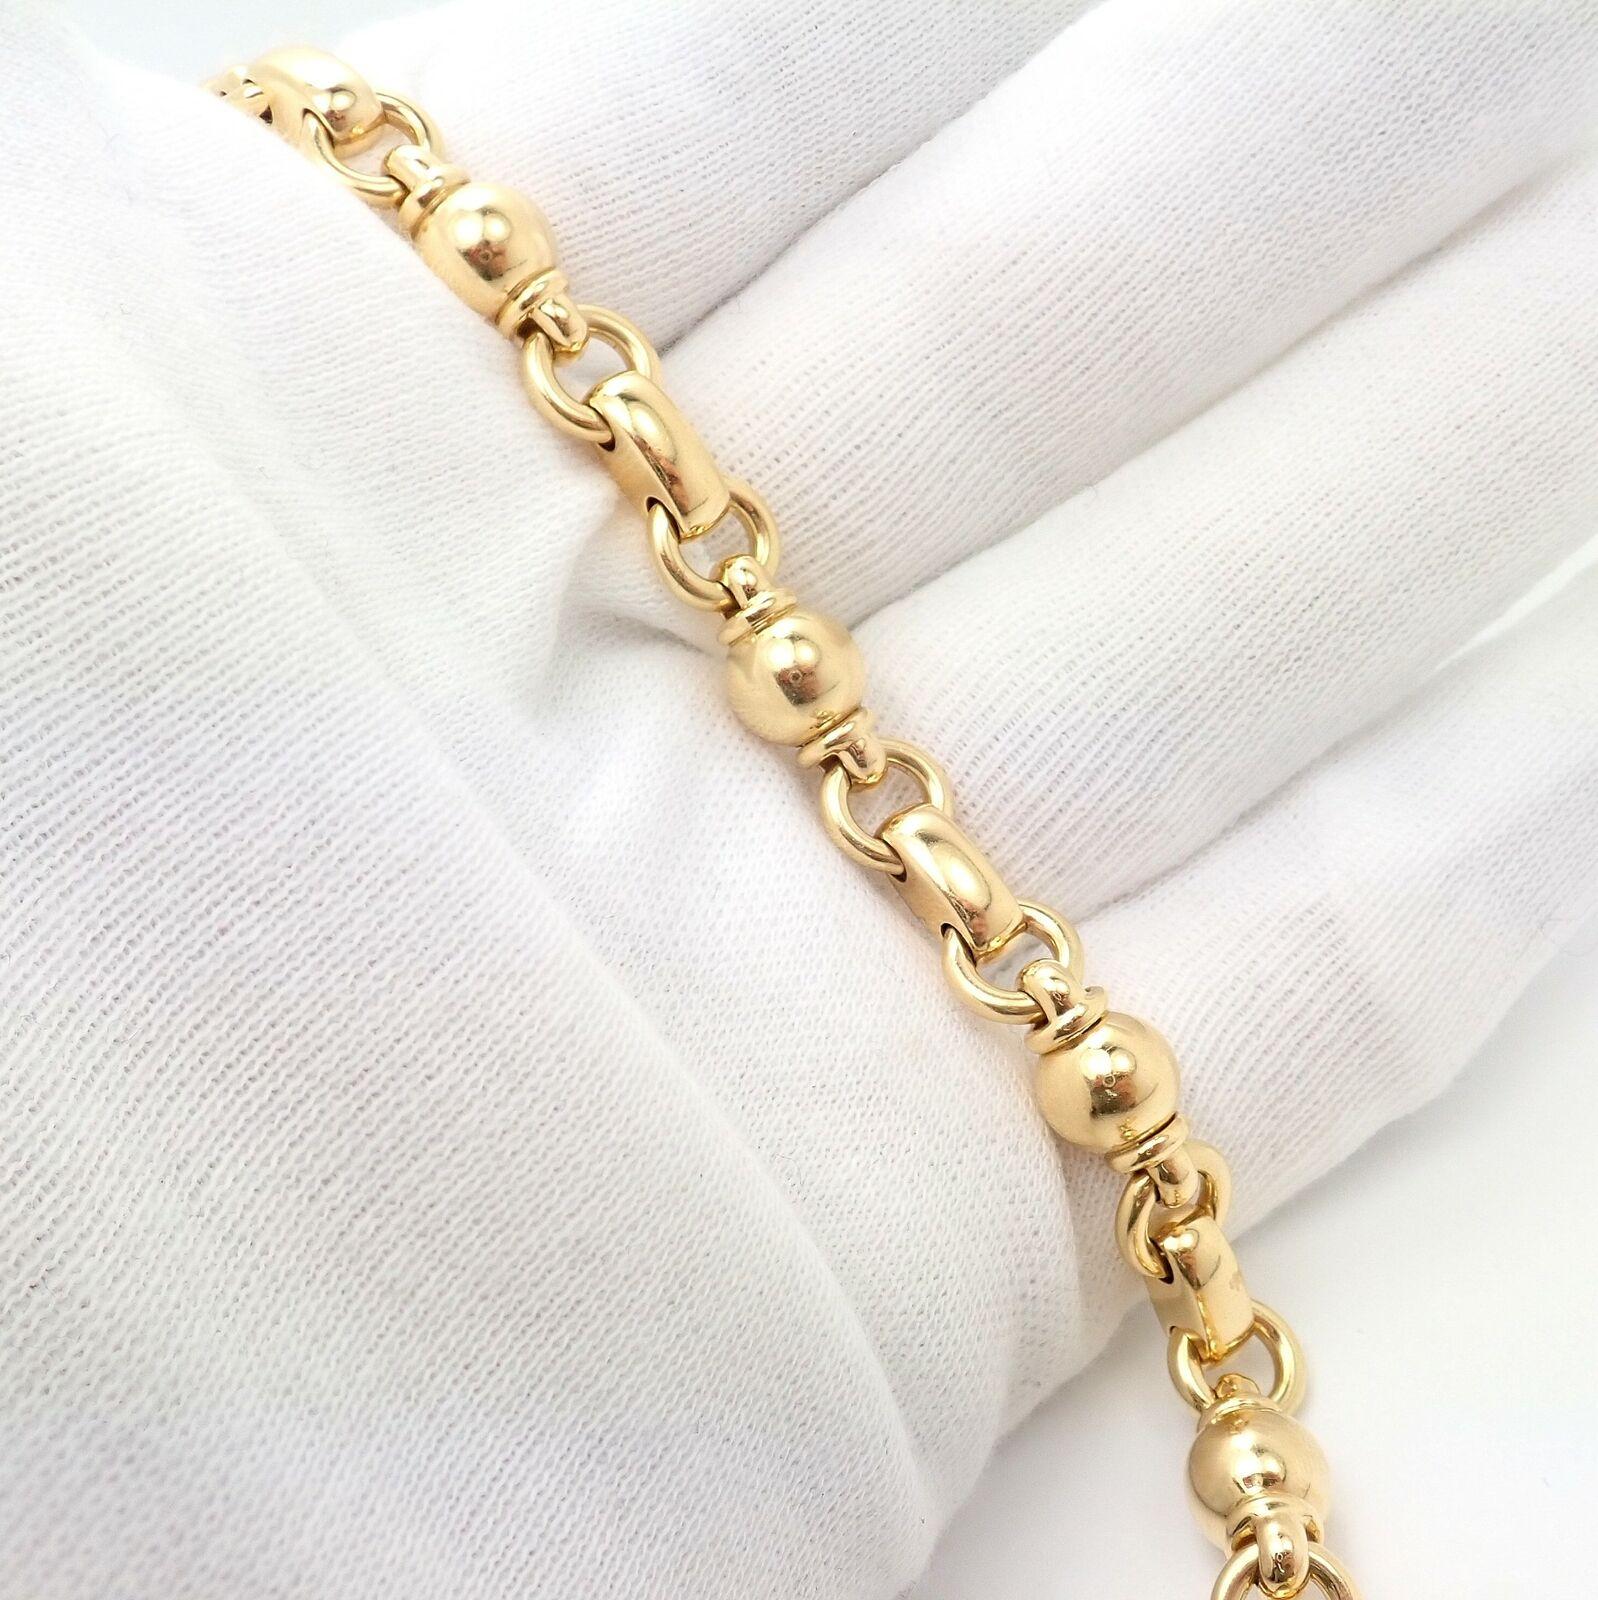 Vintage Chanel Classic Link Yellow Gold Bracelet In Excellent Condition For Sale In Holland, PA